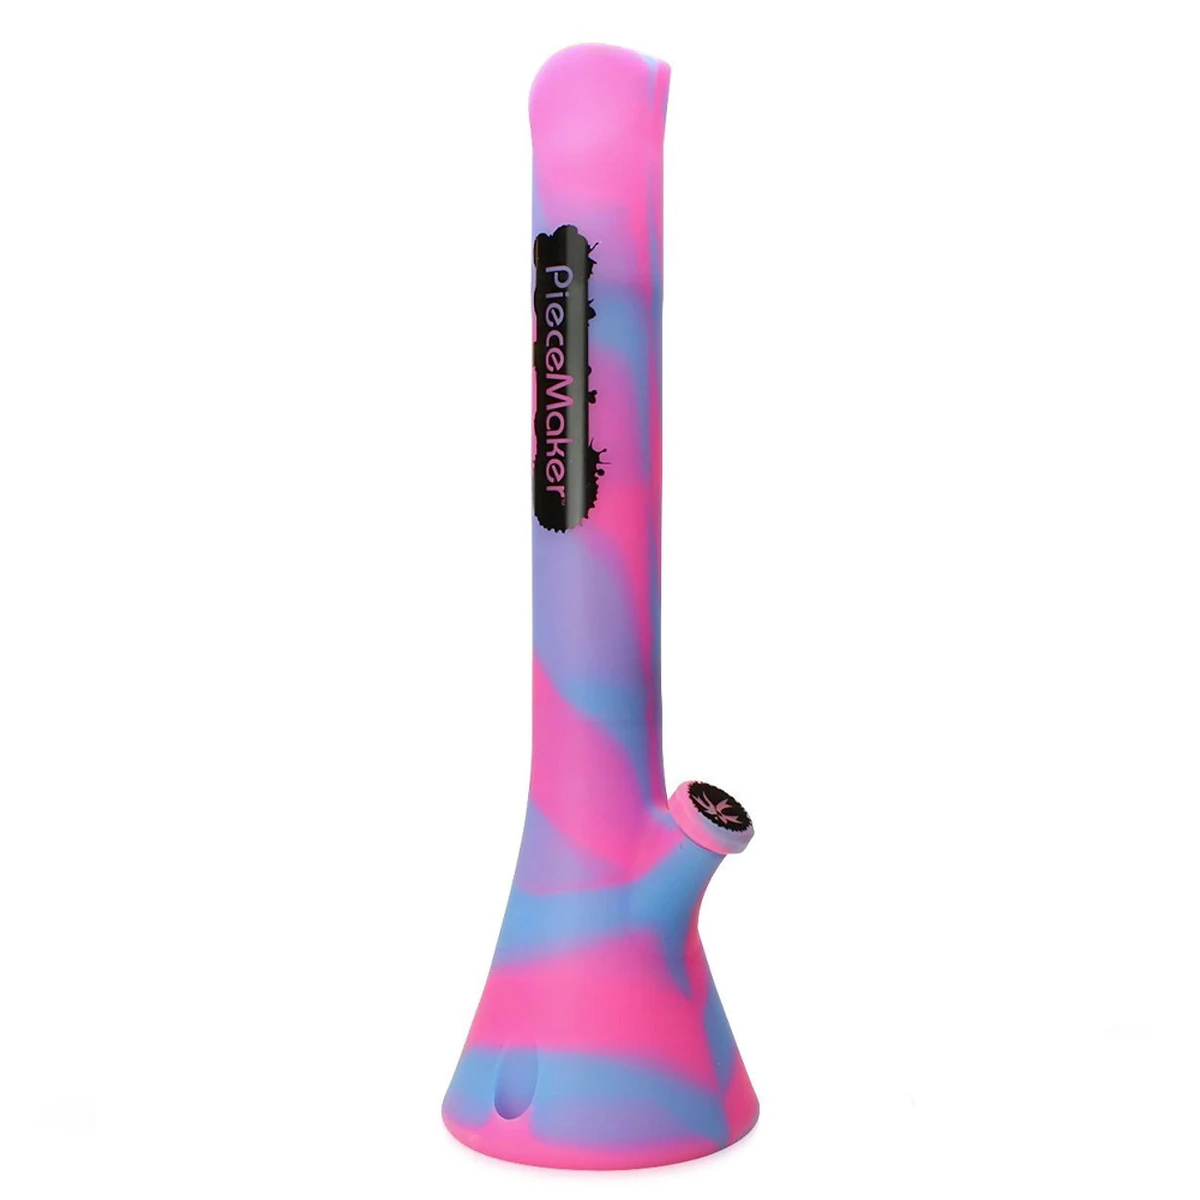 PIECE MAKER 21.5" SILICONE BEAKER W/ MUSHROOM TEK KAHUNA  Because why not? Standing at 21.5 inches tall, if you are looking to go big or go home, you have landed at the right spot. Featuring a removable base for easy cleaning, and our patented hex tex down stems to insure a smooth and powerful hit.